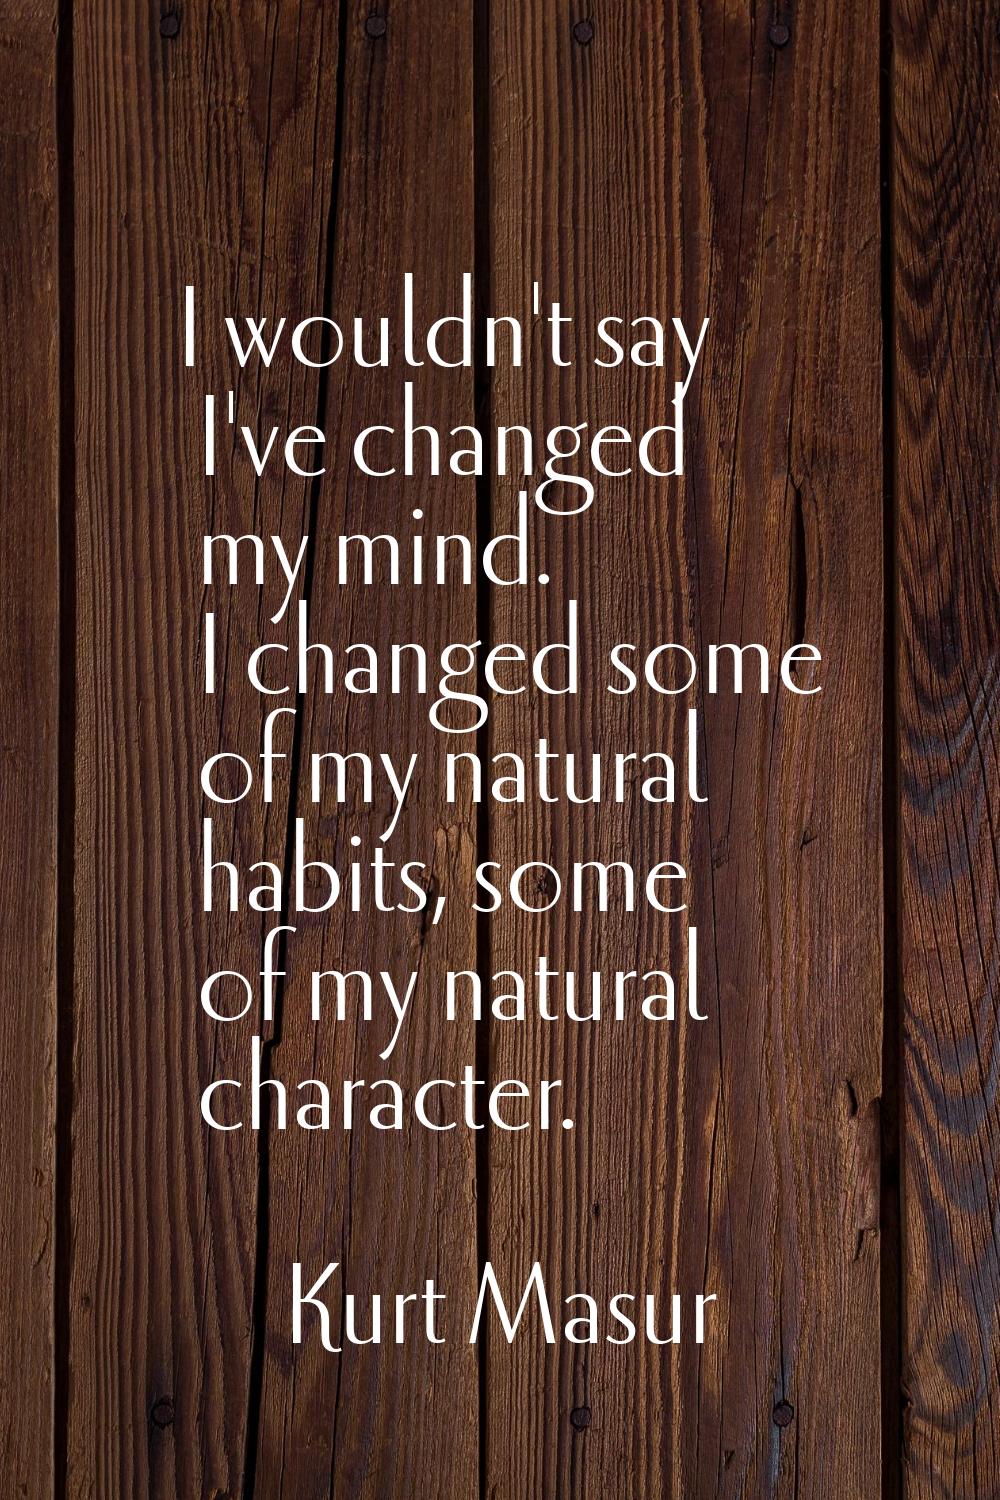 I wouldn't say I've changed my mind. I changed some of my natural habits, some of my natural charac